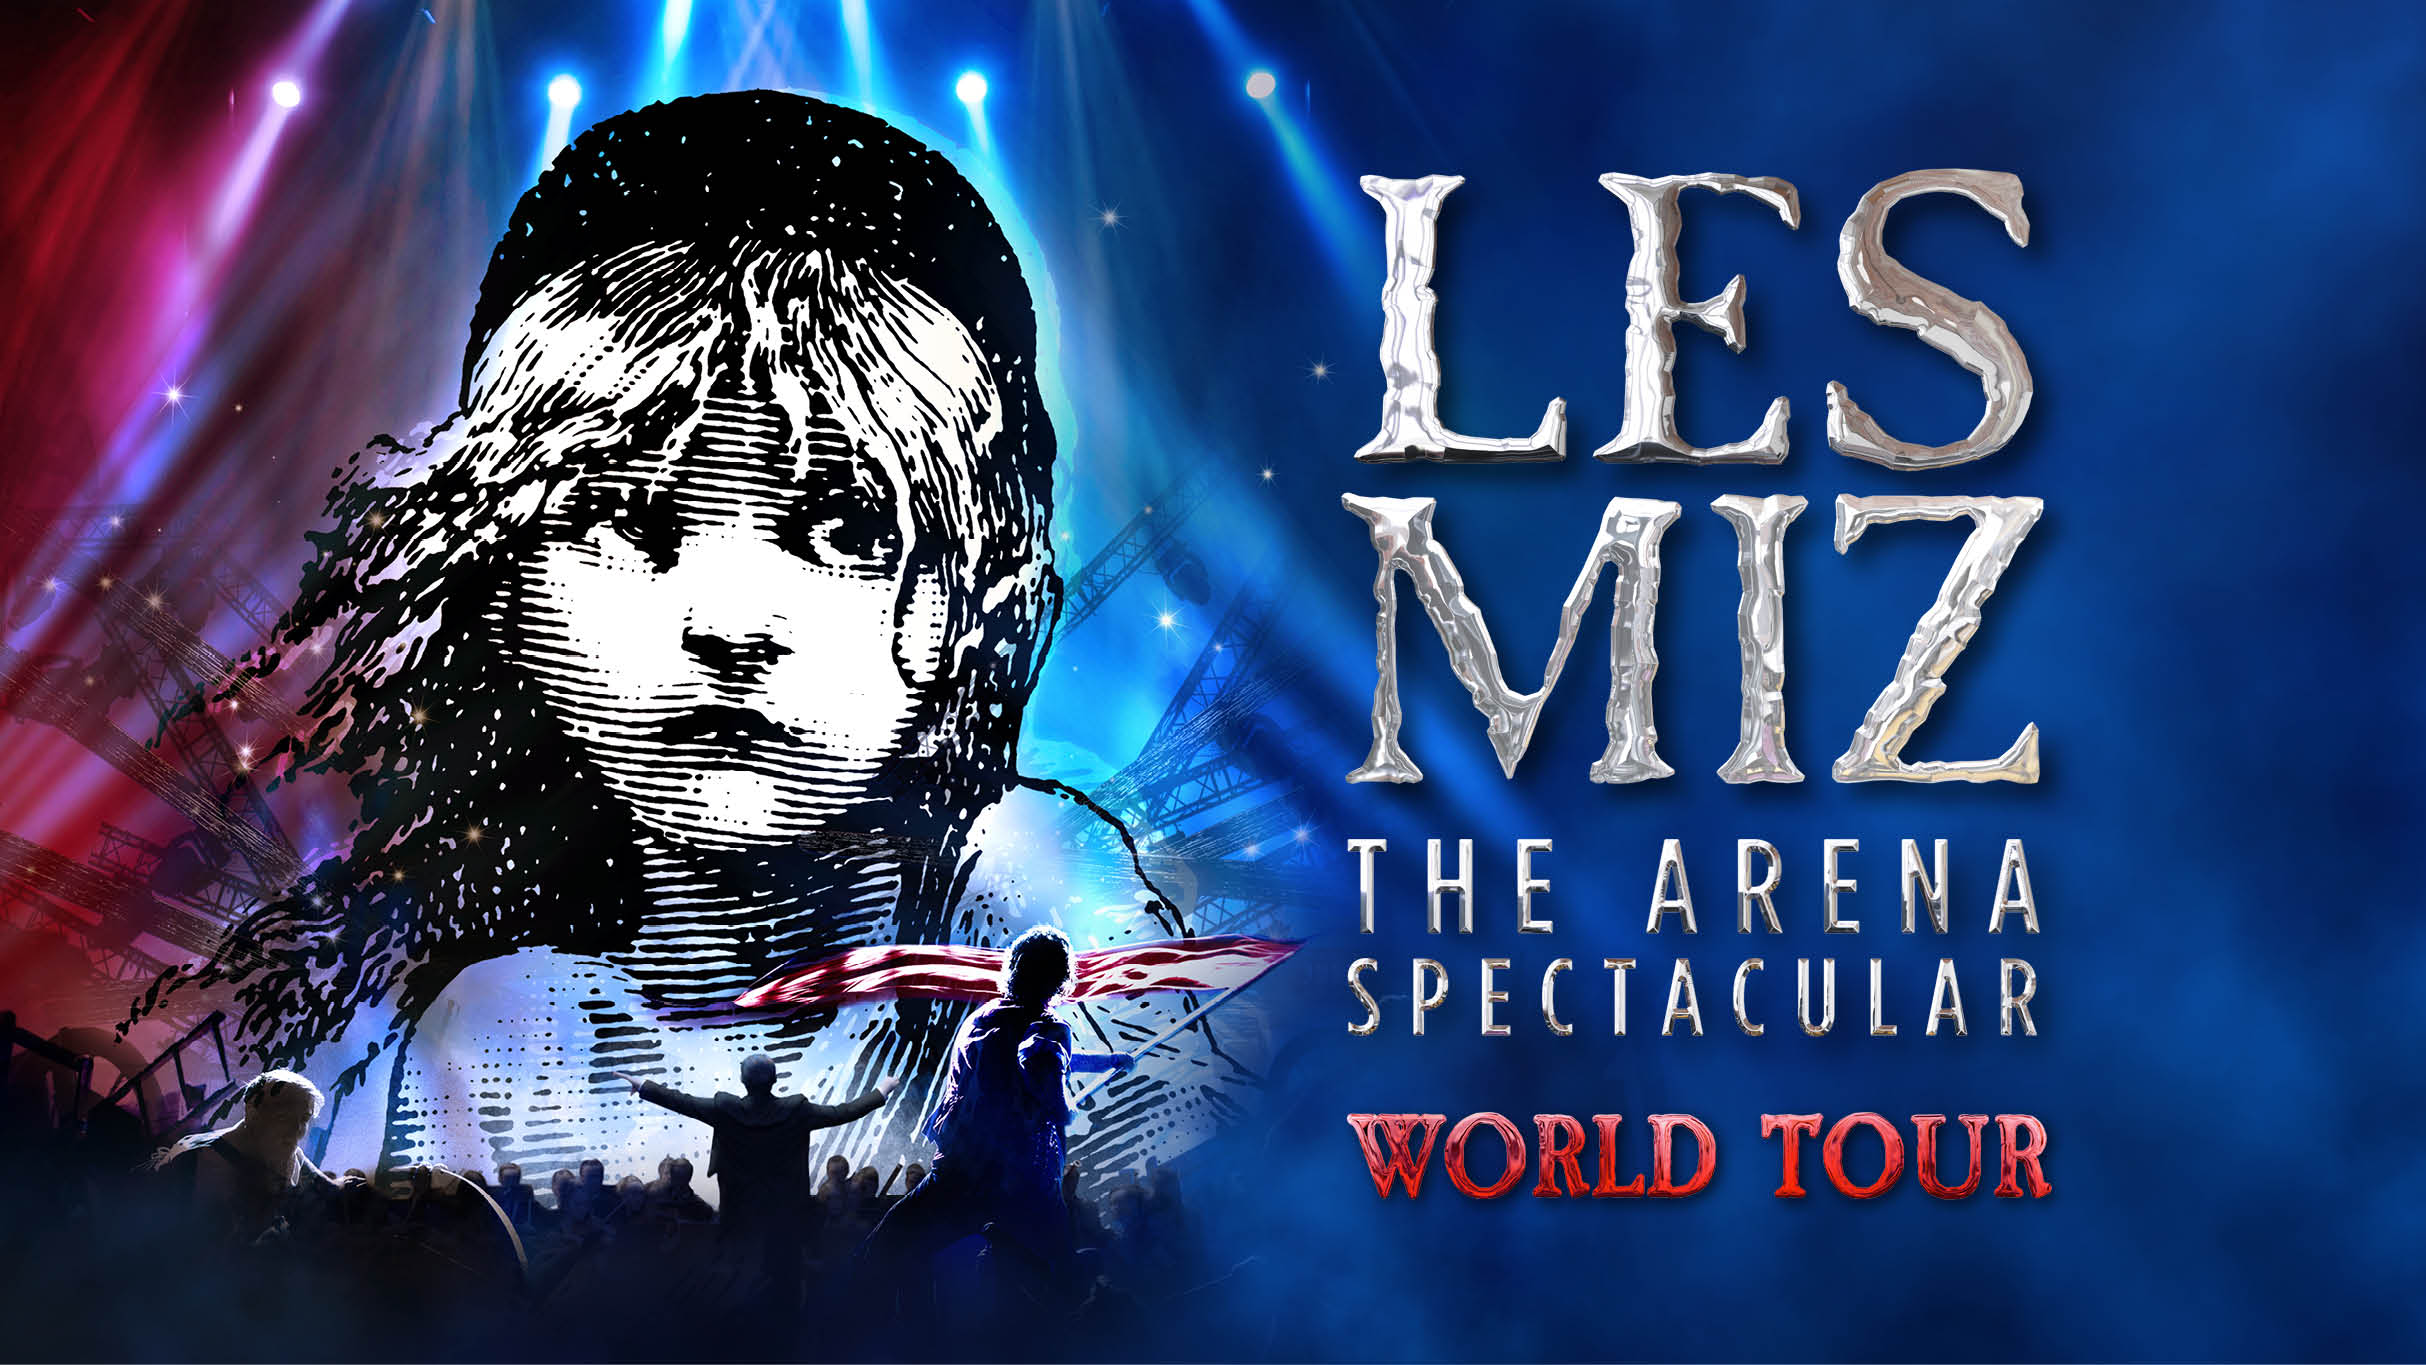 Les Miserables: The Arena Spectacular